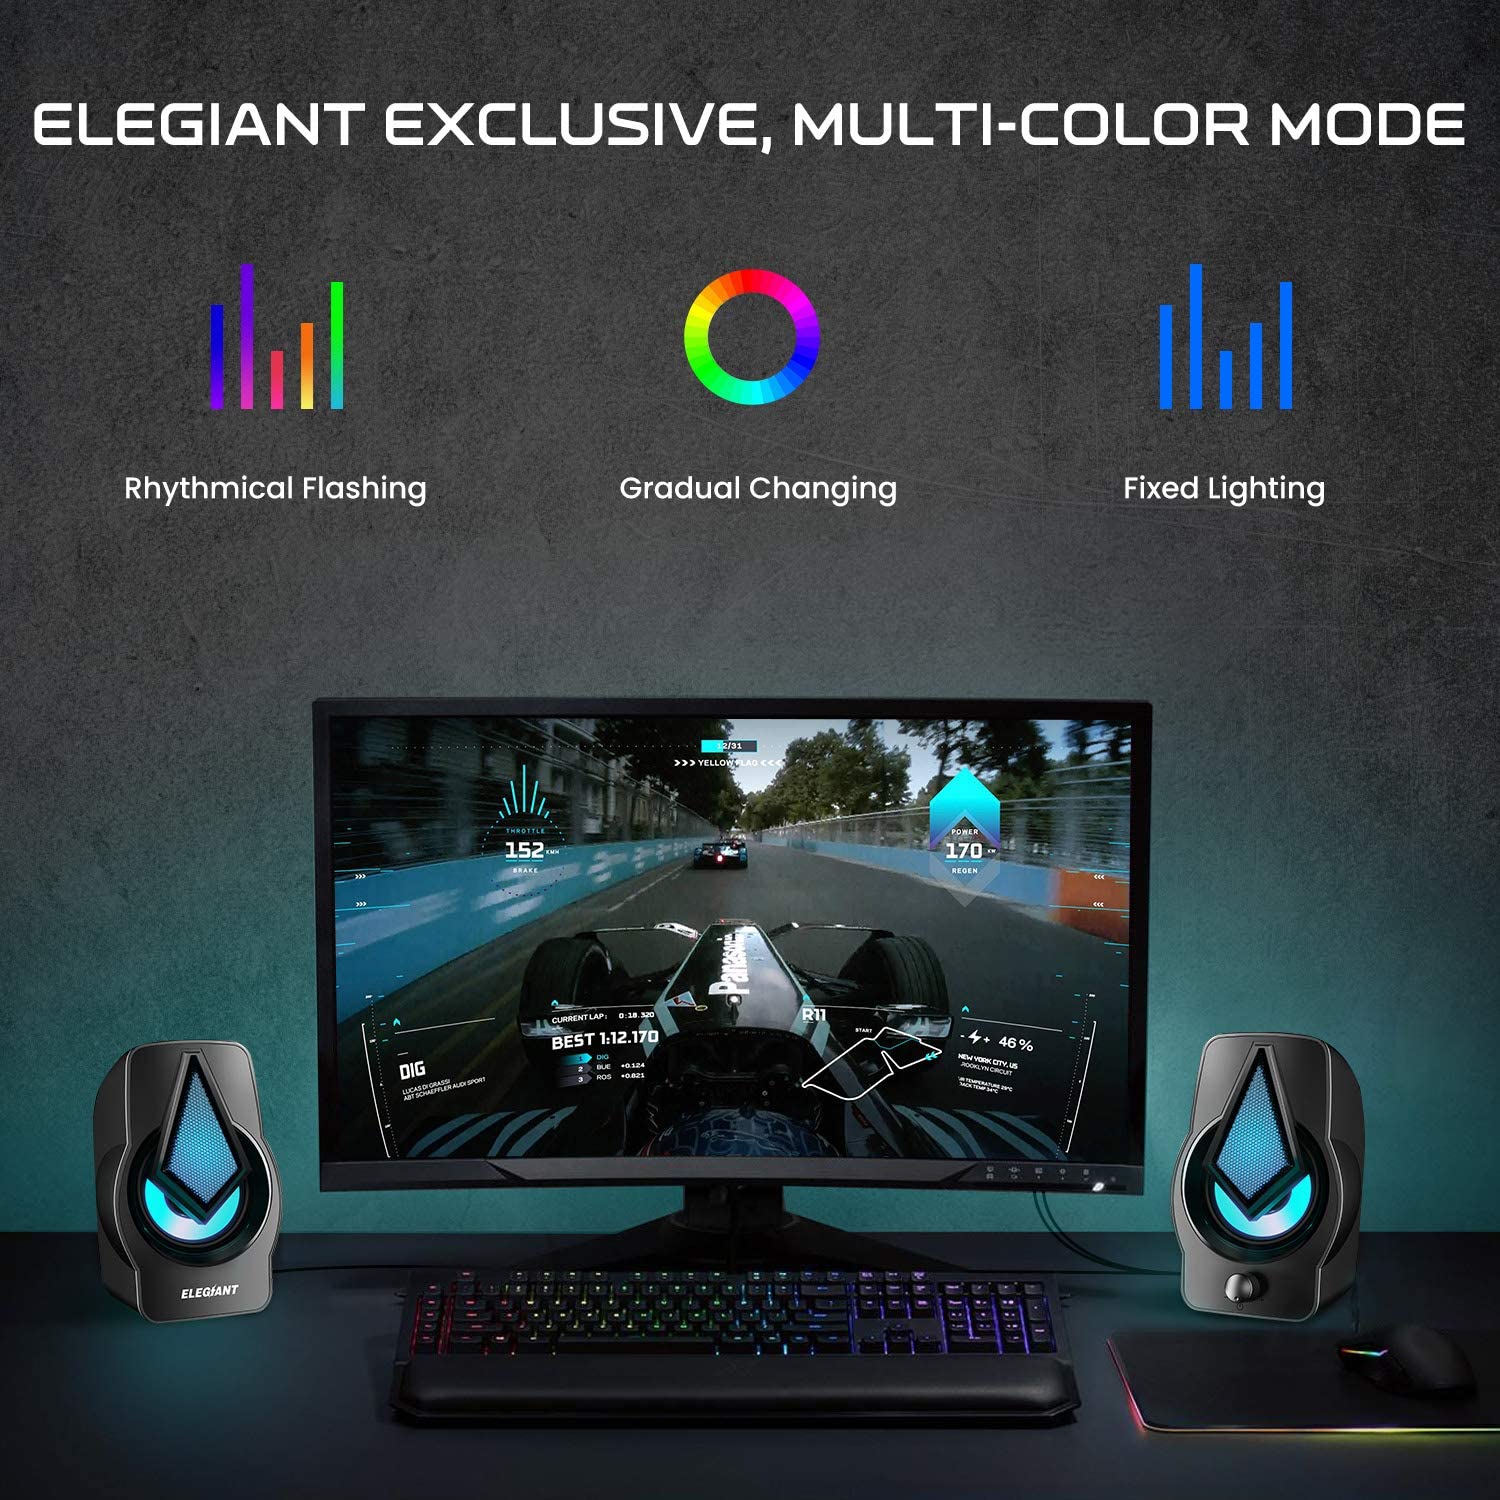 Computer Gaming Speakers, ELEGIANT 10W LED PC Speakers with RGB Multi-Light Rhythm Modes, Easy-Access Volume Control, 2.0 Stereo USB Speakers for PC/Laptops/Desktops/Phone/Ipad - image 3 of 7